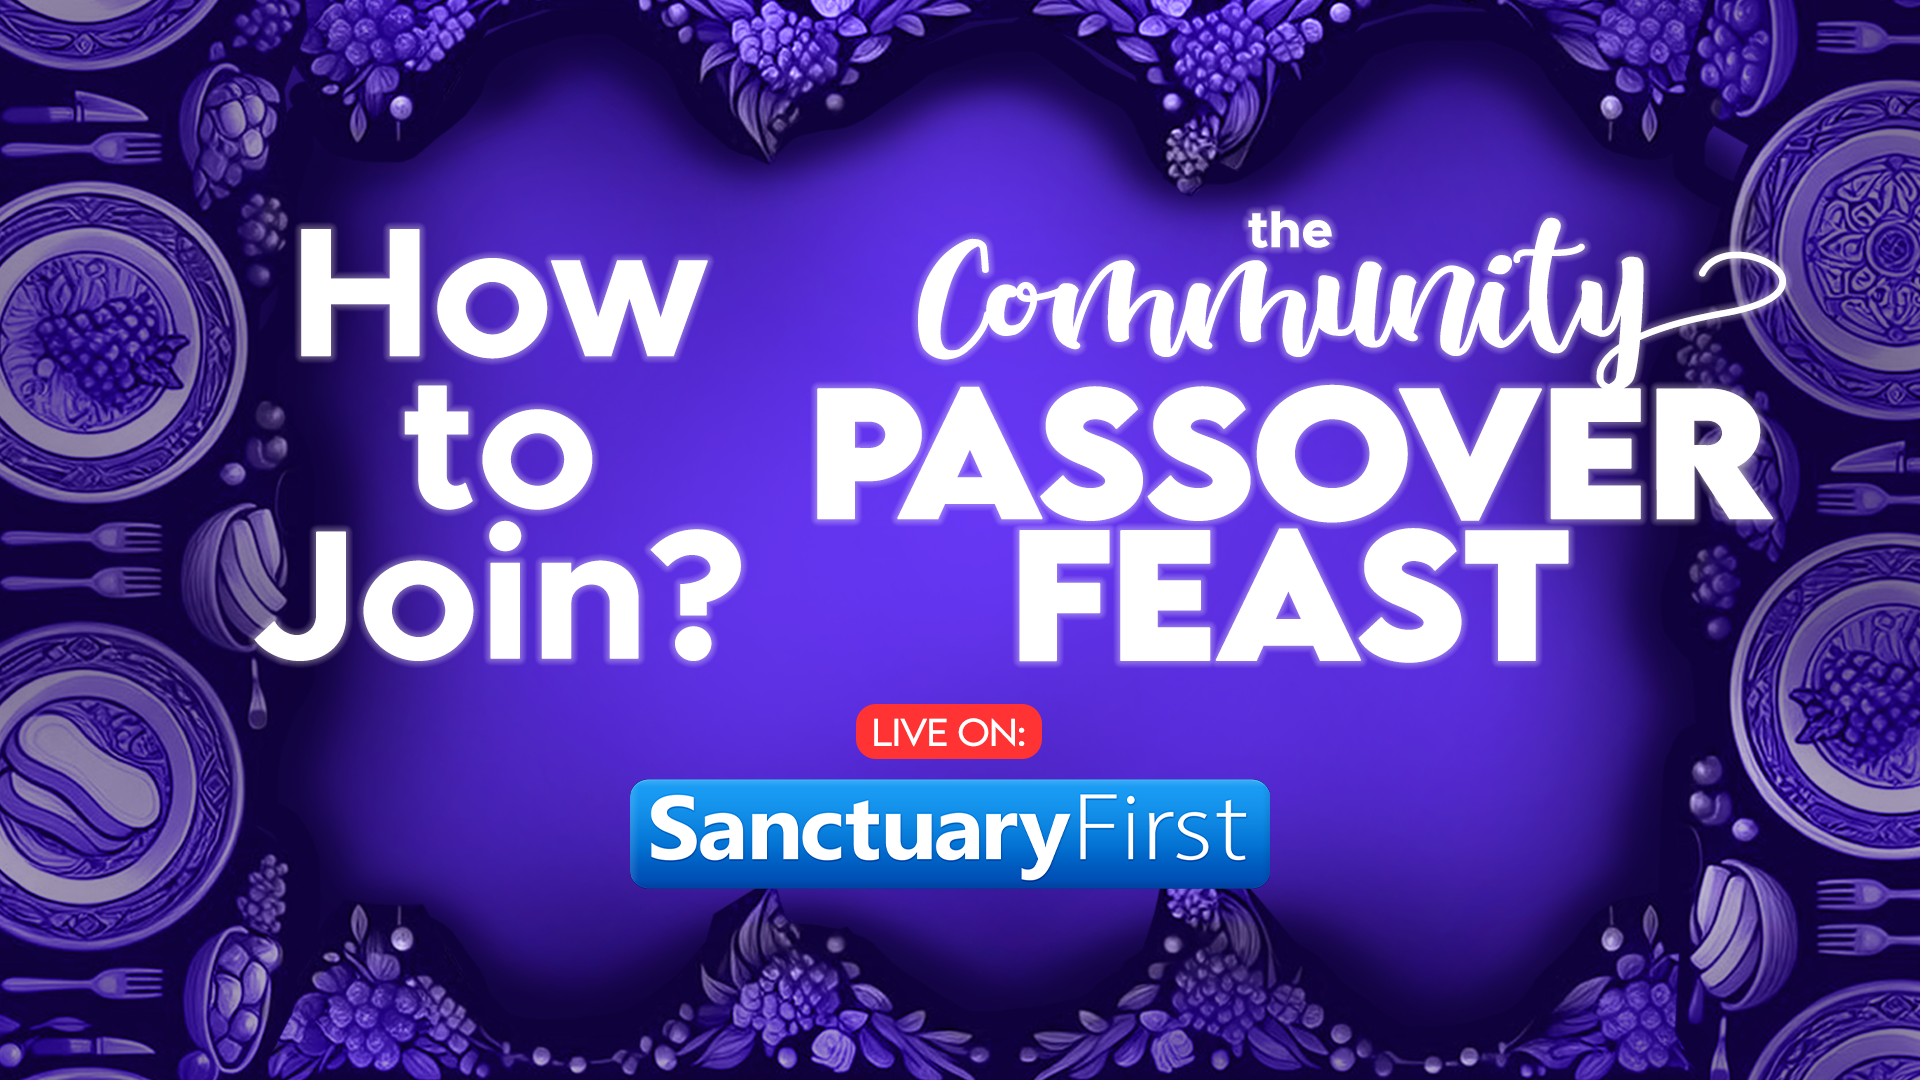 How to Join our Community Passover Feast